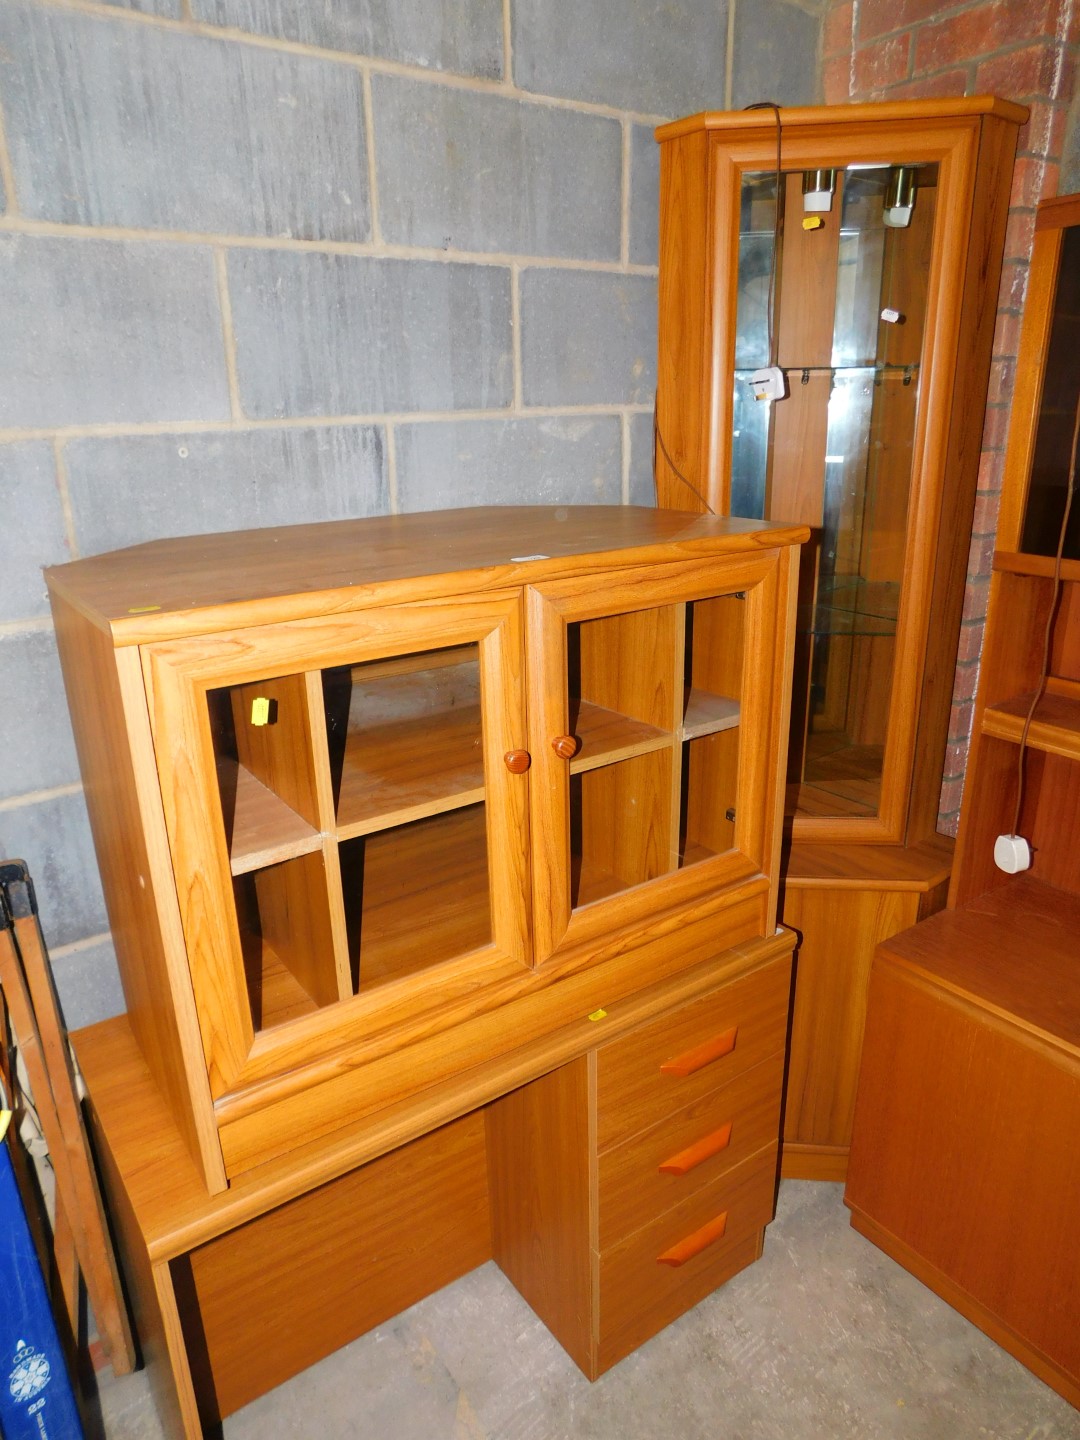 A teak MDF kneehole desk, 94cm wide, corner display cabinet, the top section with glass shelves